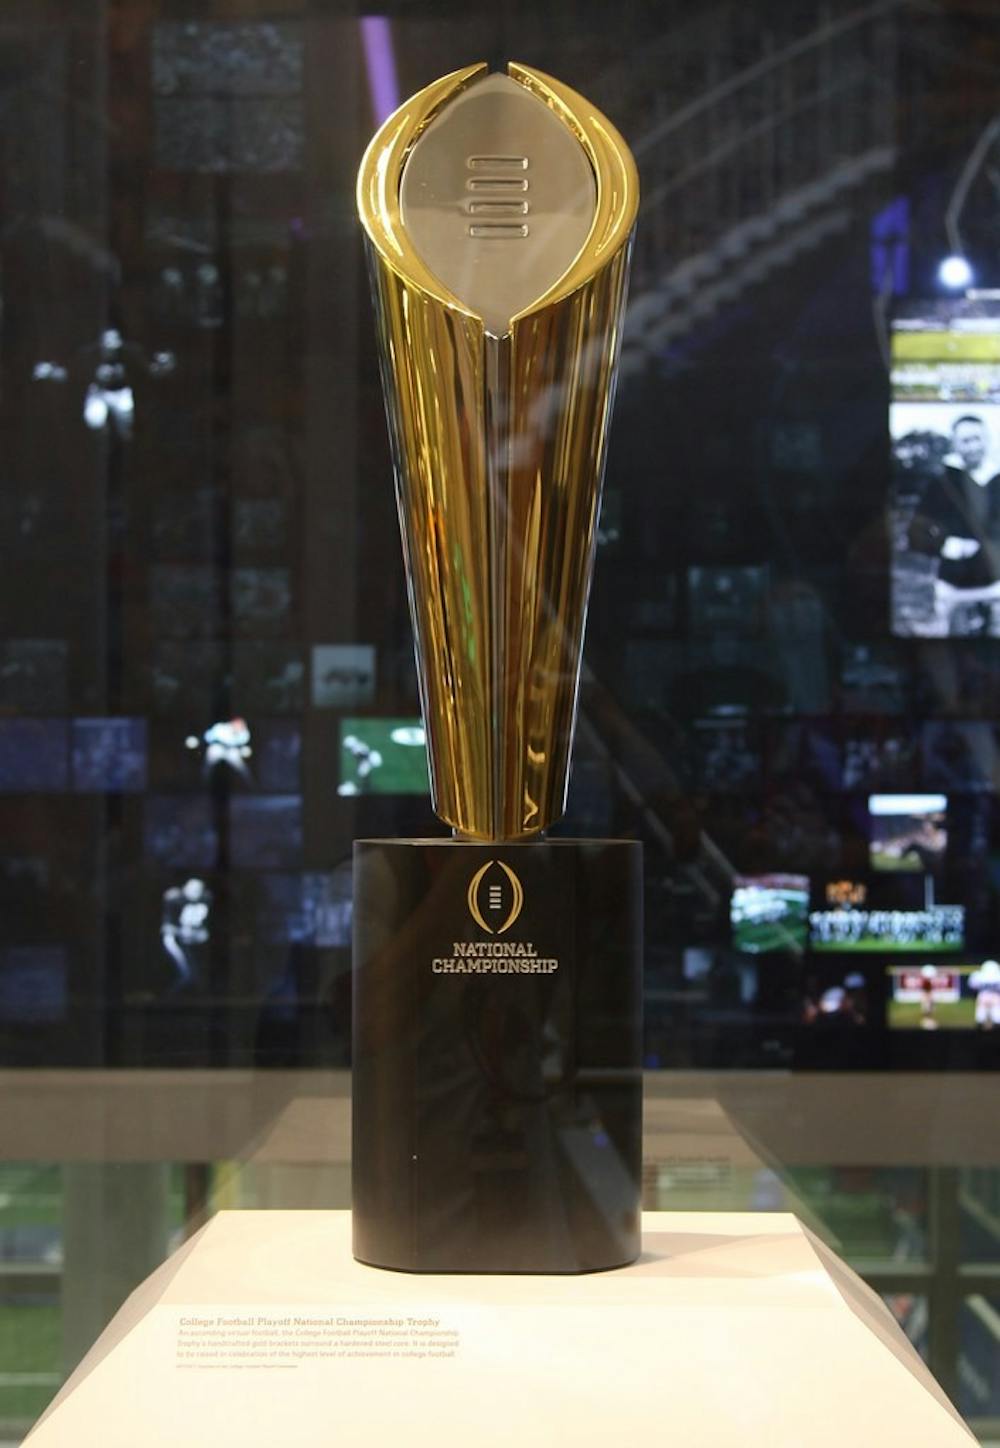 <p>The College Football national championship trophy sits in display at The College Football Hall of Fame in Atlanta, GA Aug. 31, 2017. Alabama has won three national championships since the playoffs started in 2014. <em><strong>Photo Credit: Michael Li, Flickr.</strong></em></p>